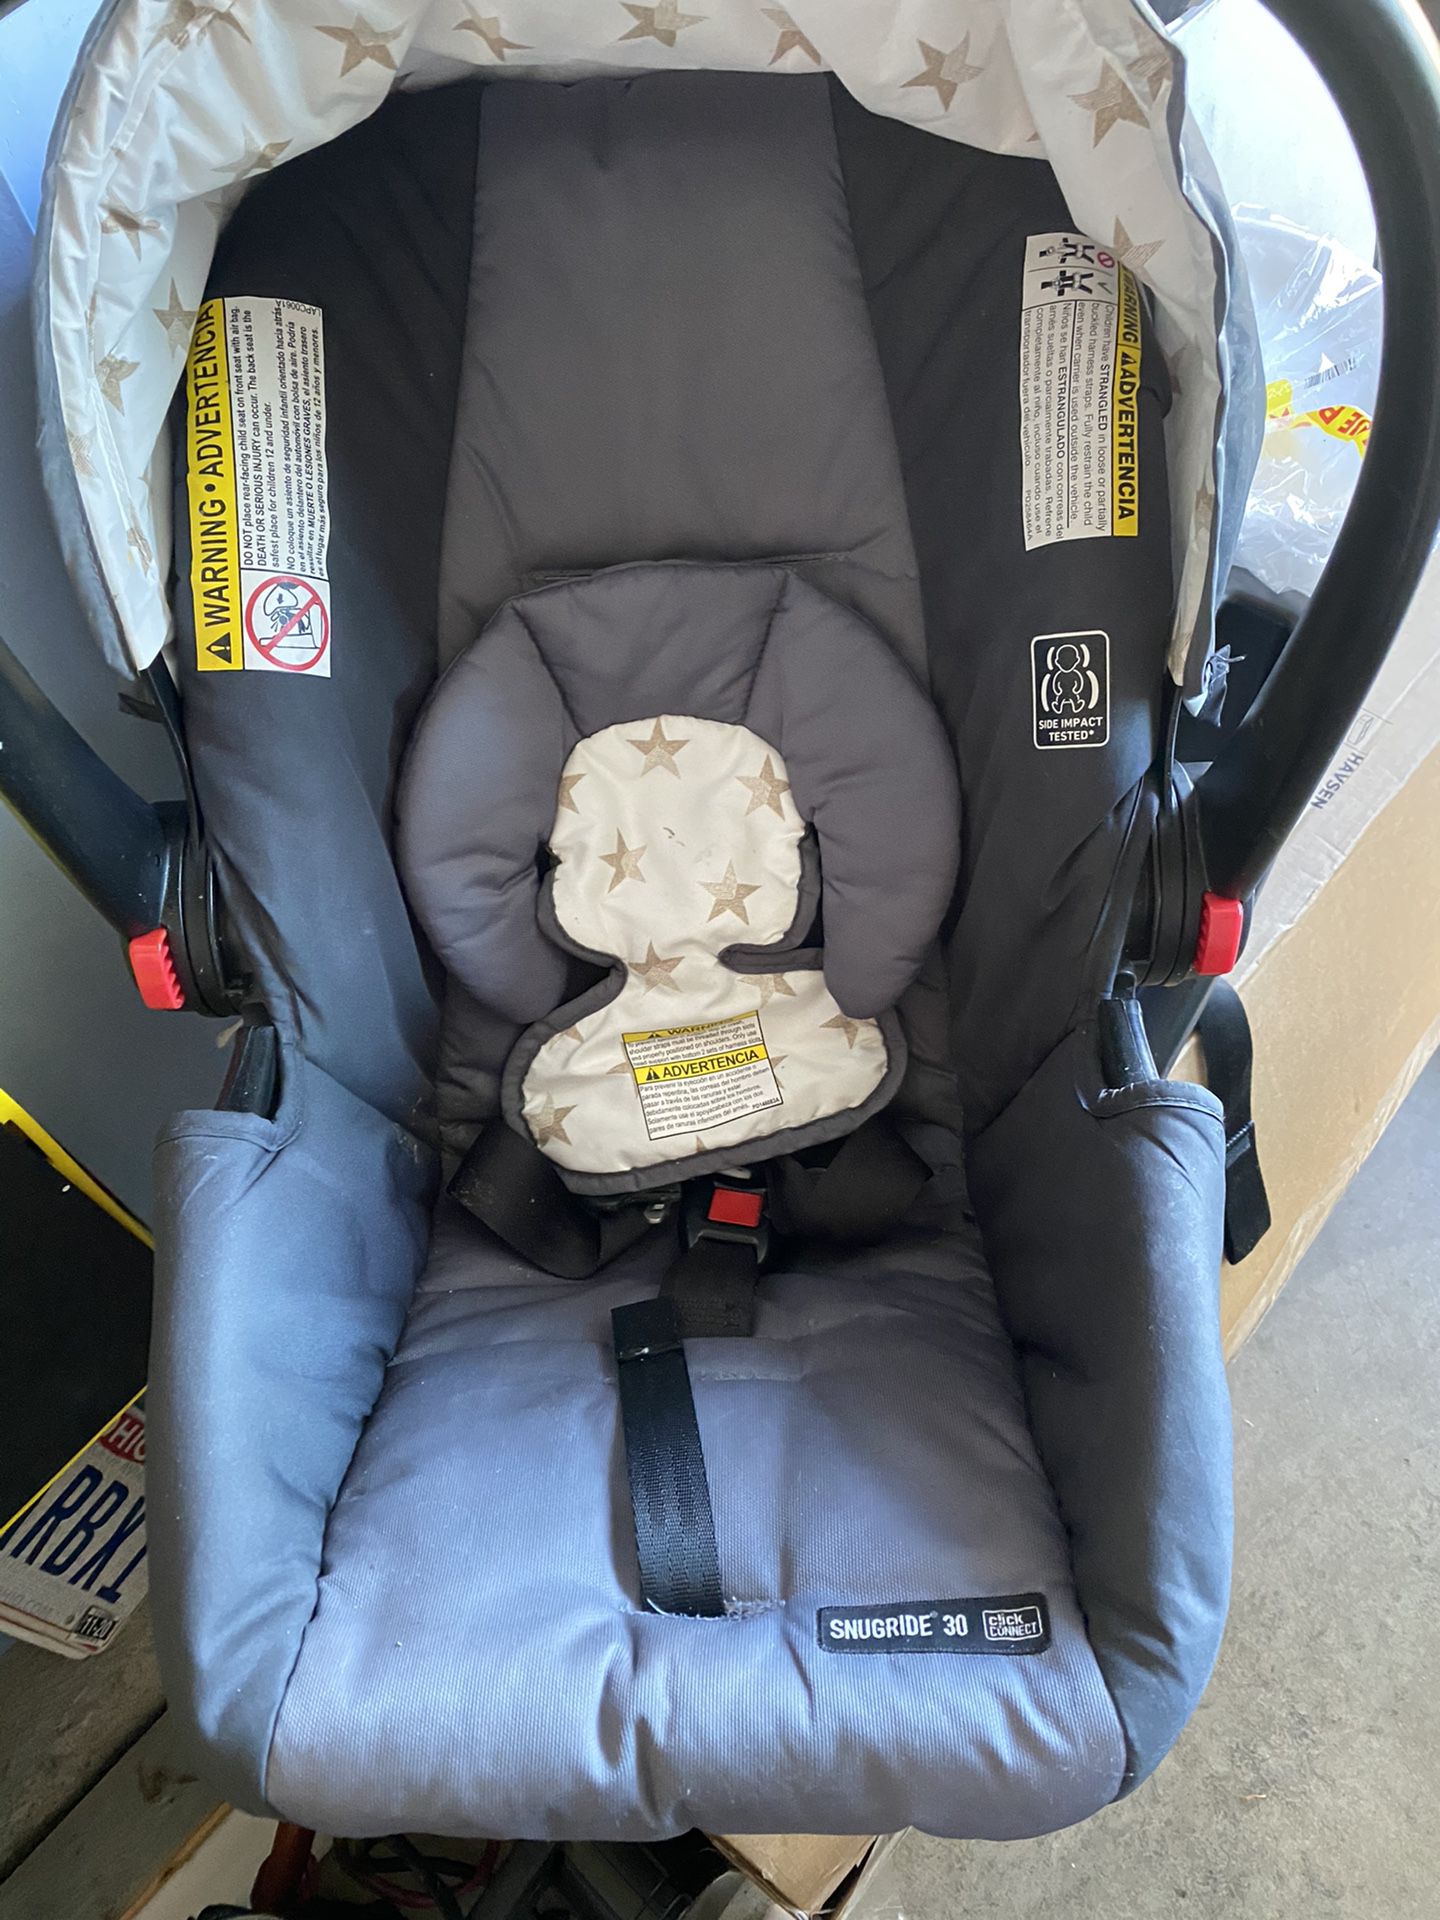 Graco car seat with hold piece